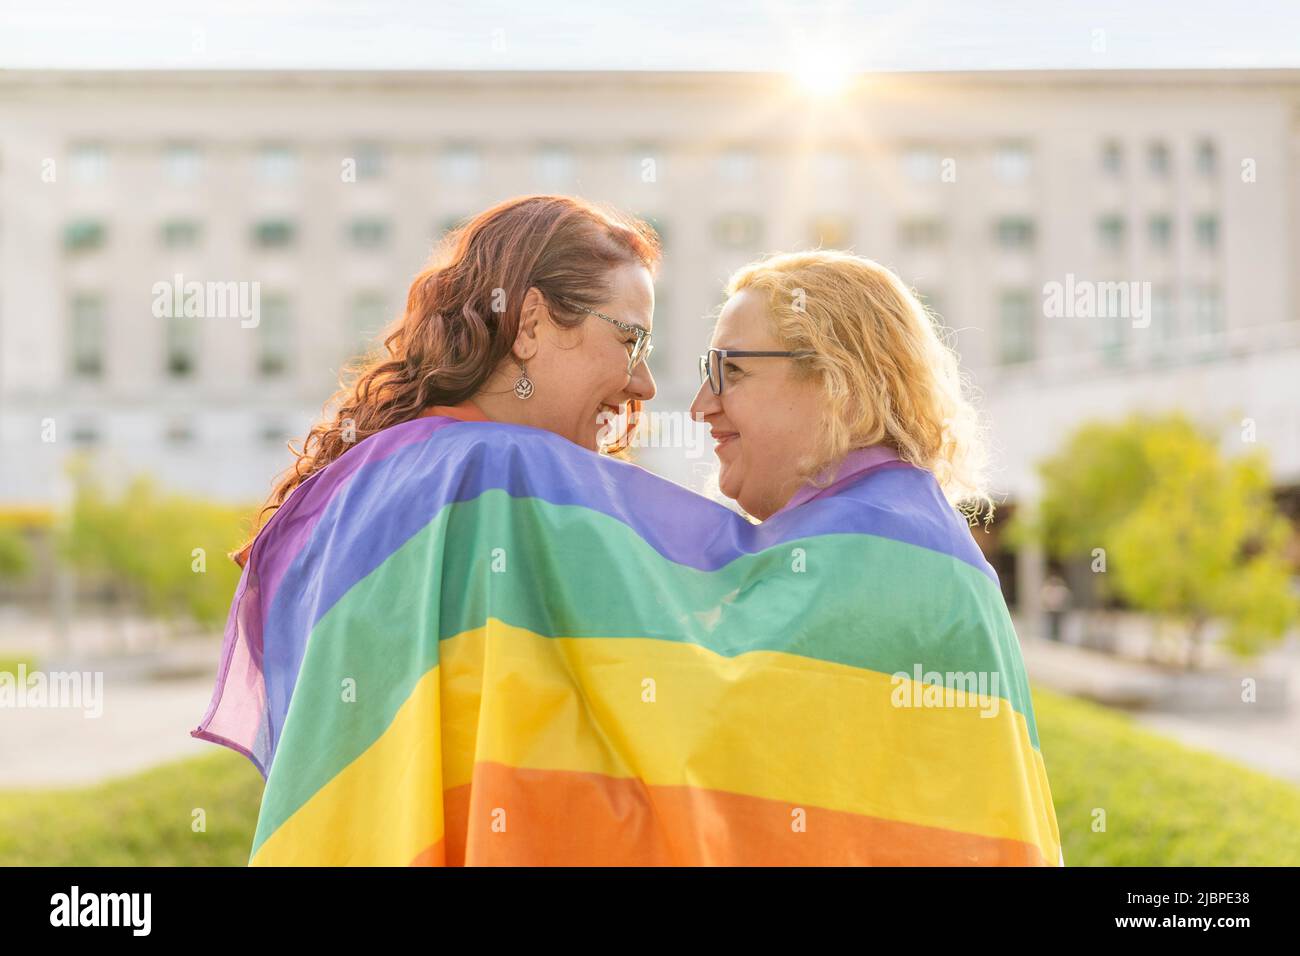 Lesbian women couple in love embracing each other, wrapped in a gay flag, in a park at sunset, with reflections of the sun. Concept of diversity, prid Stock Photo